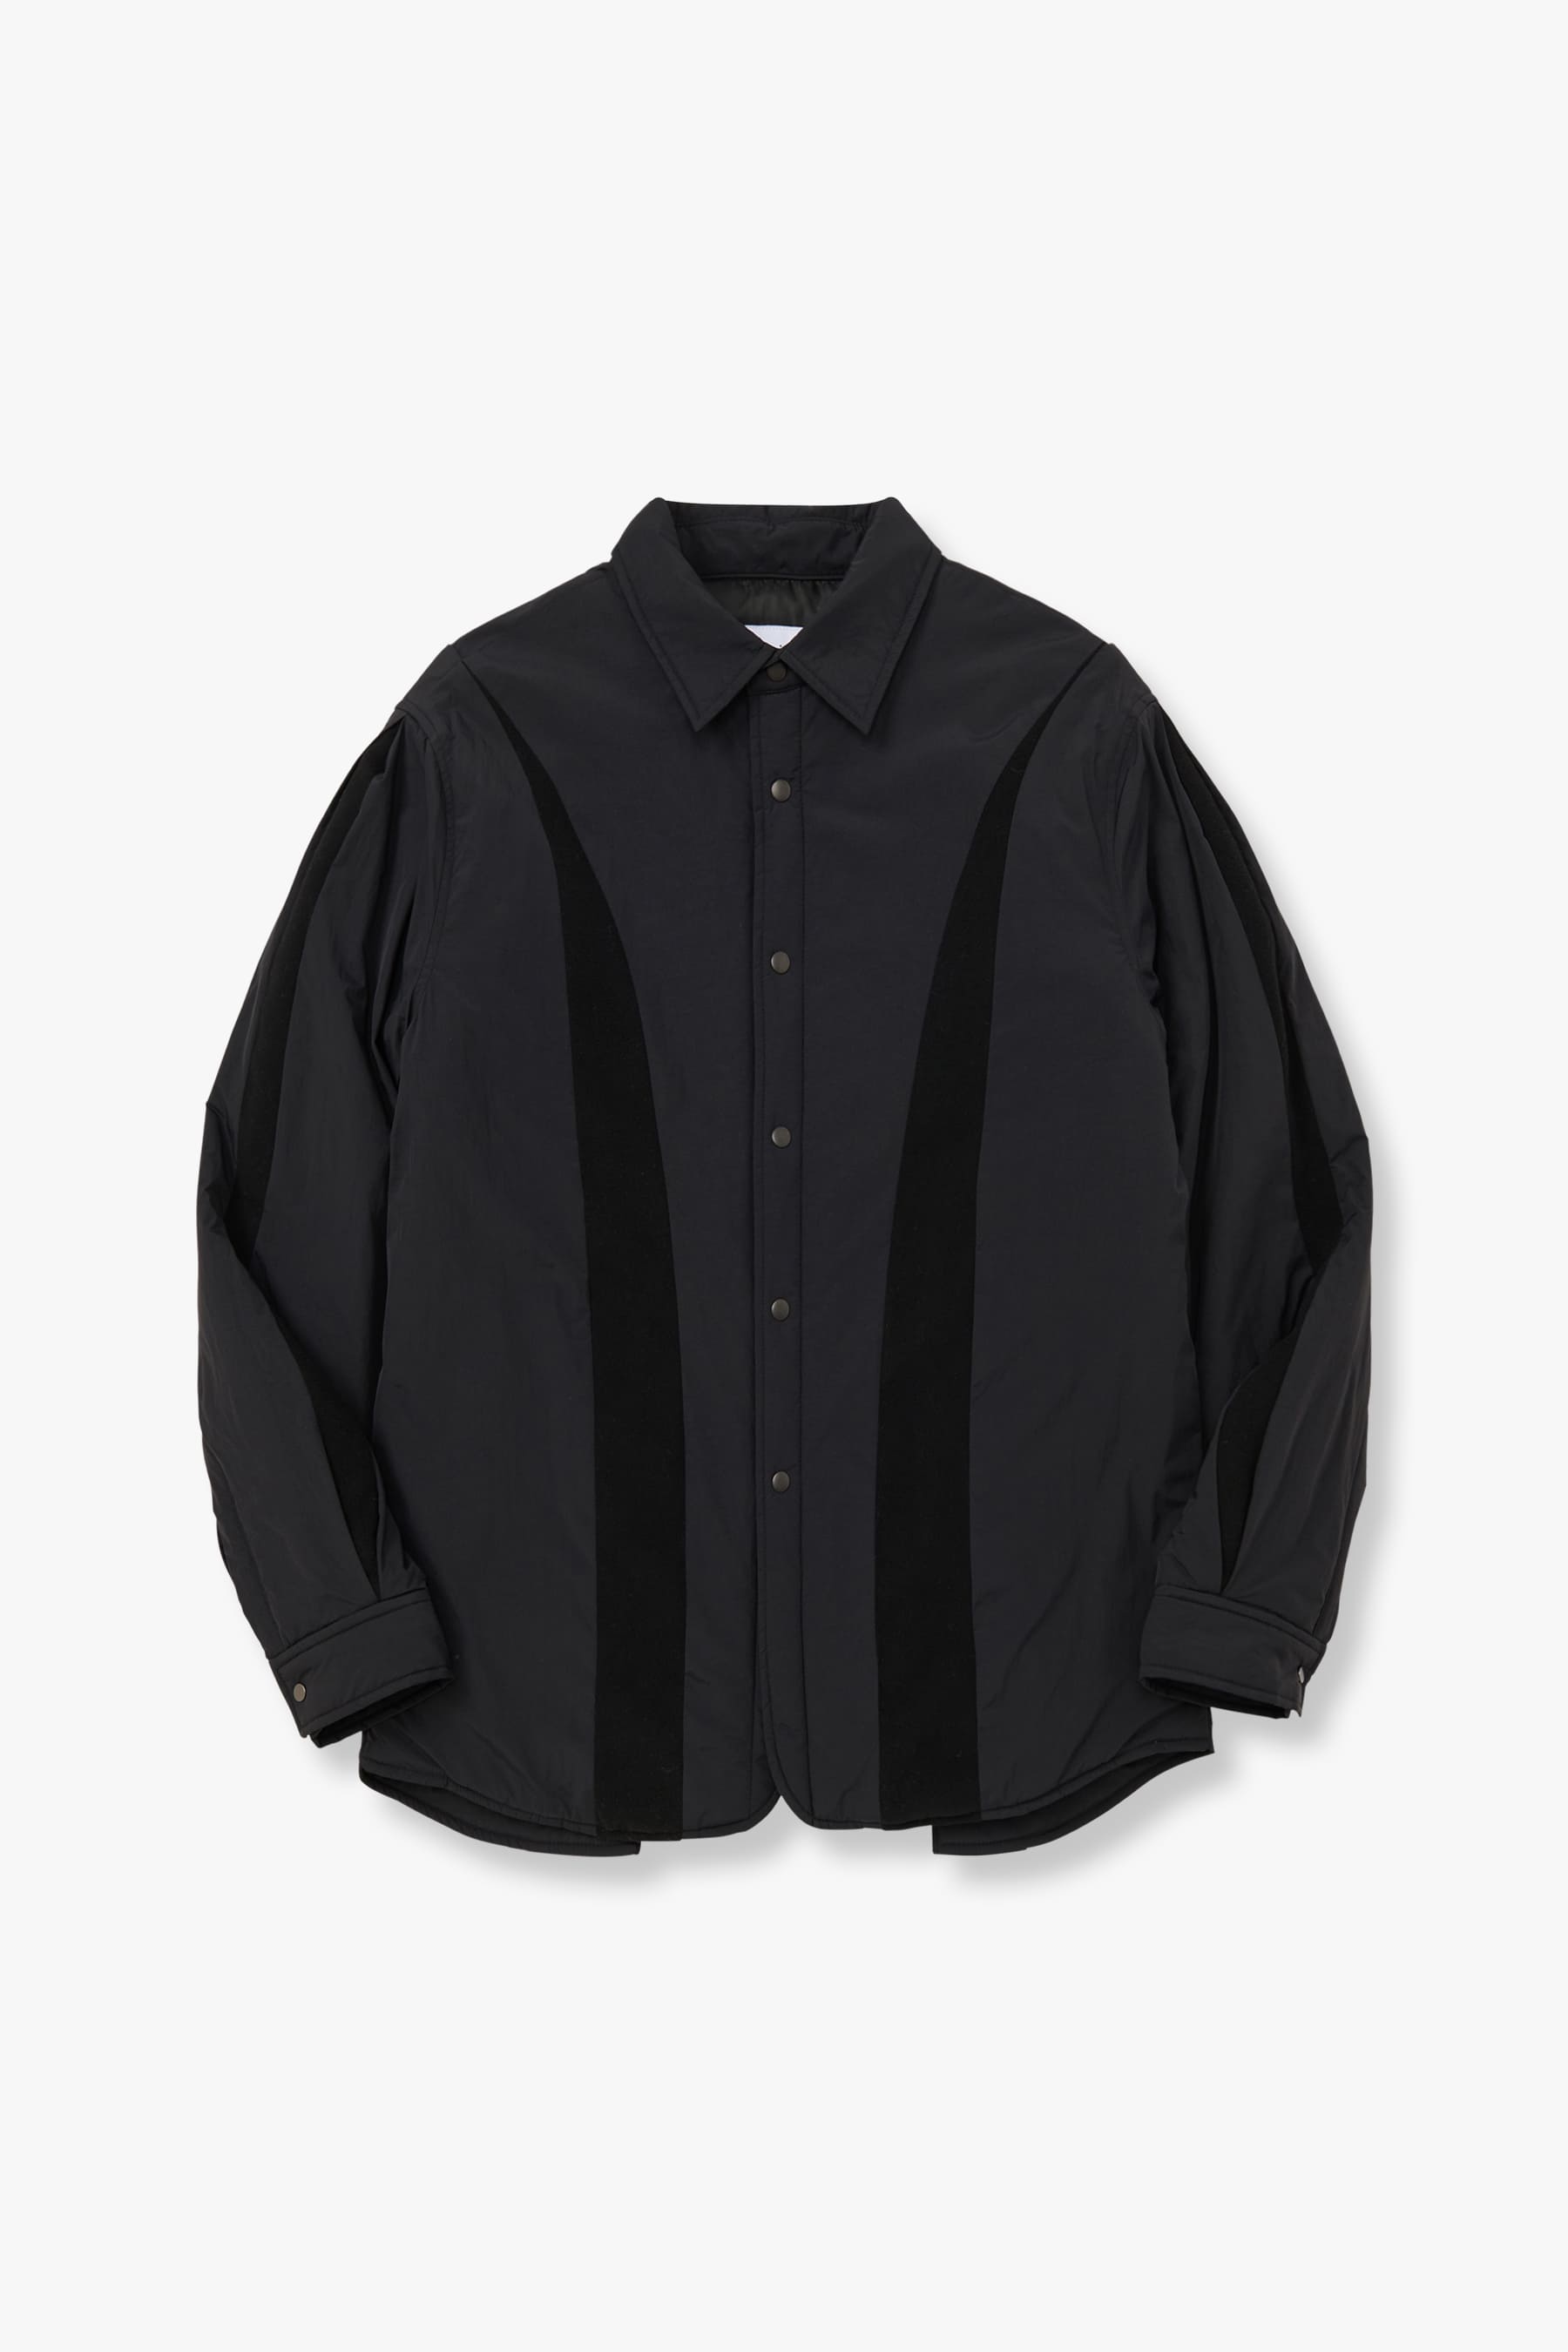 BLACK PADDED SECTIONED SHIRTS JUMPER